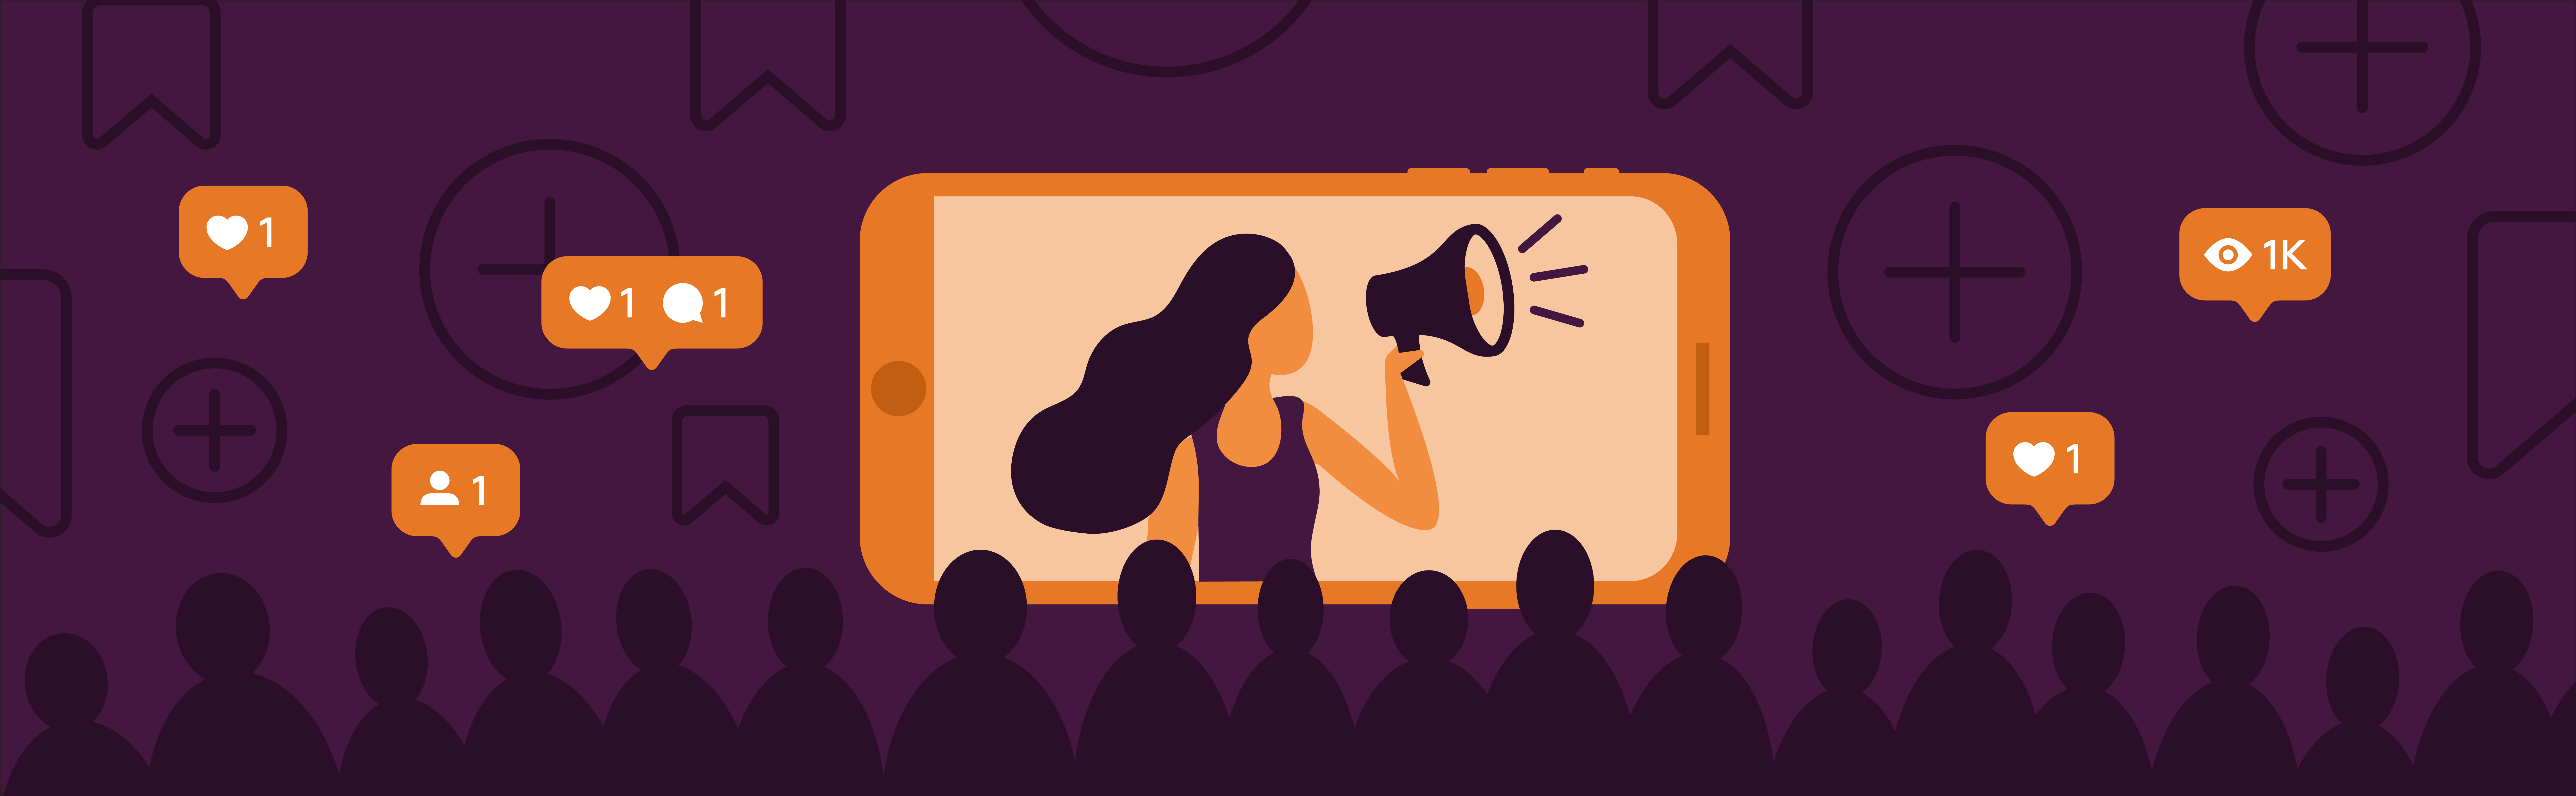 Move theater setting with influencer on screen speaking into a megaphone. Audience is watching and social media "like" icons are floating around them. successful influencer marketing campaigns